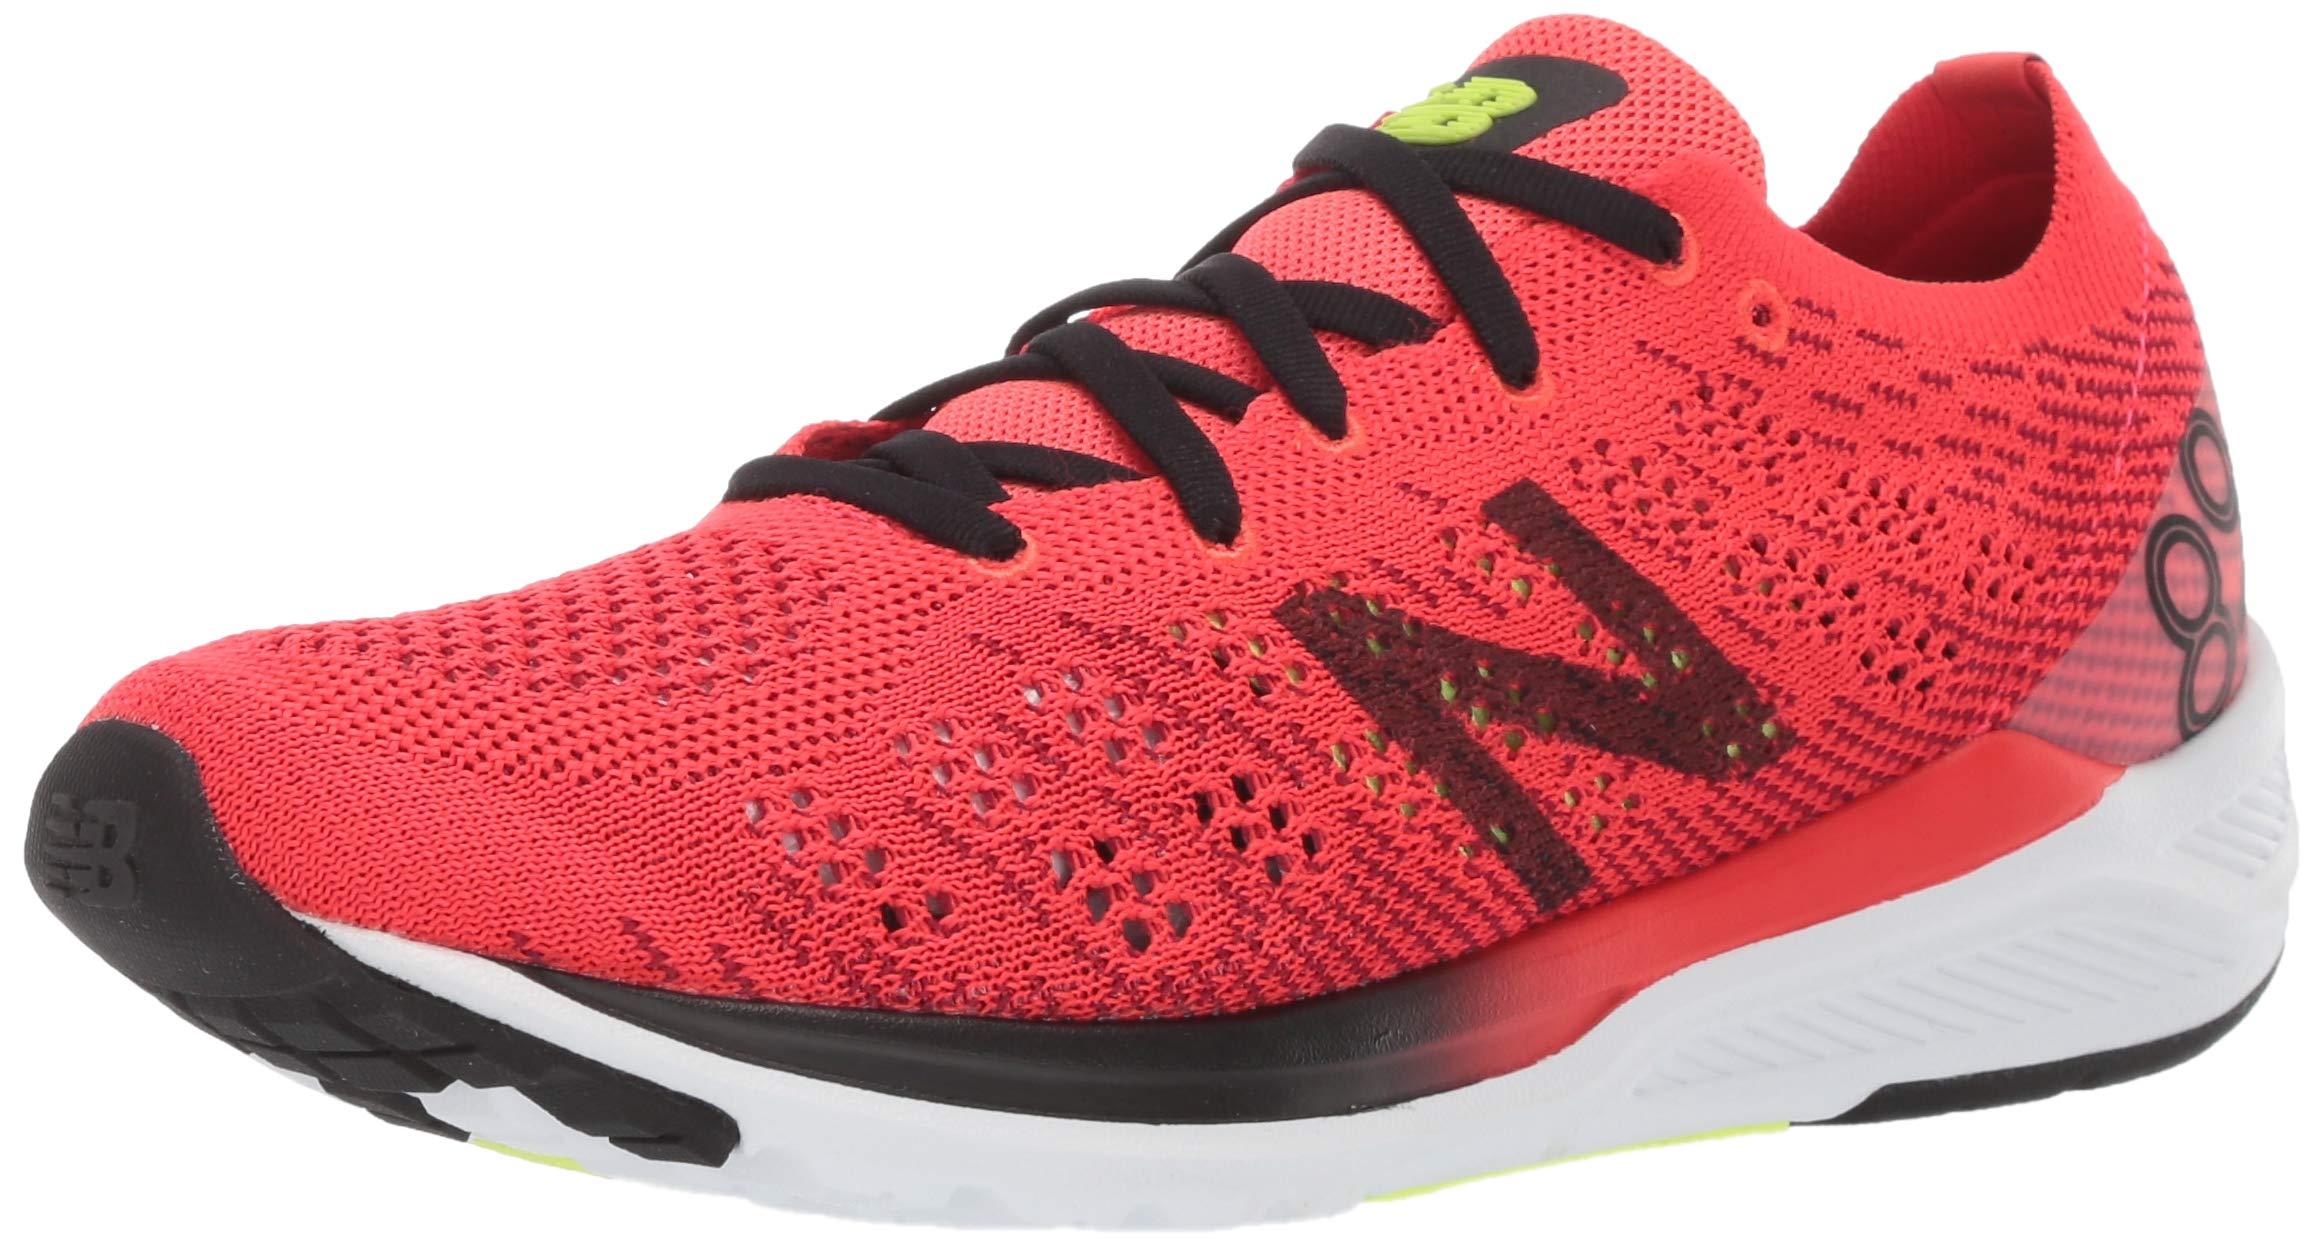 New Balance Synthetic 890 V7 Running Shoe in Red for Men - Lyst